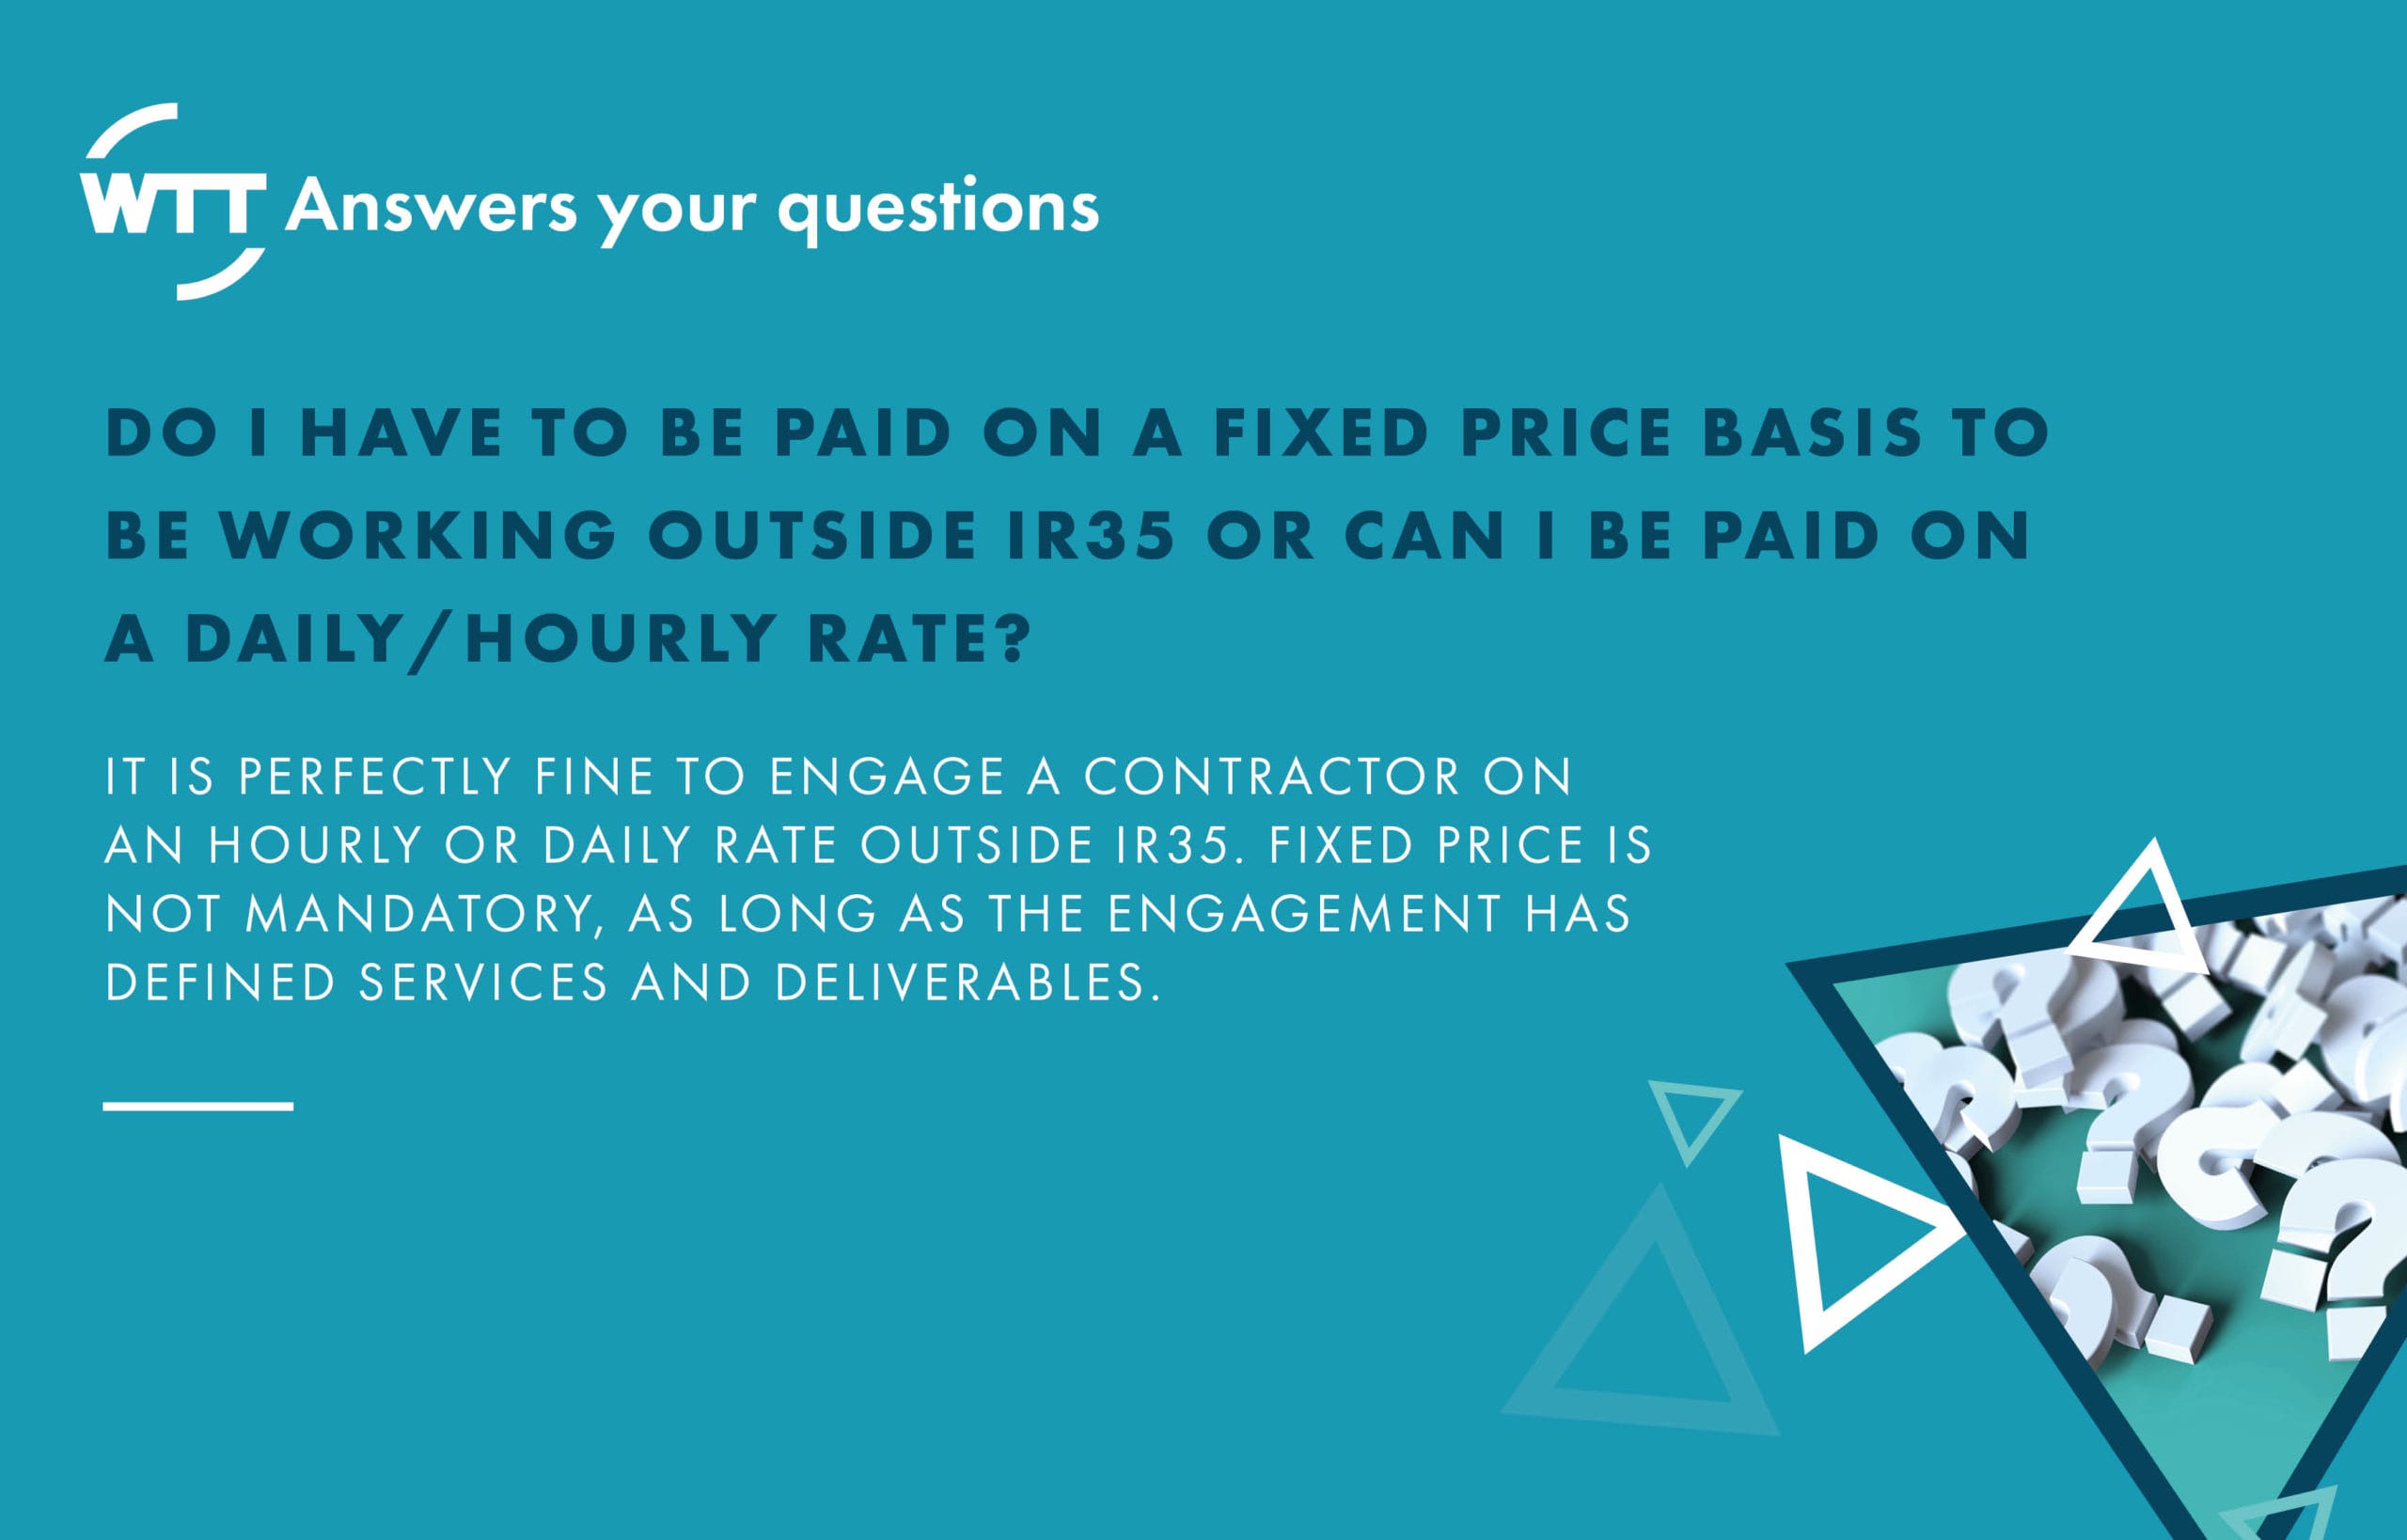 Do I have to be paid on a fixed price basis to be working outside IR35 or can I be paid on a daily/hourly rate?